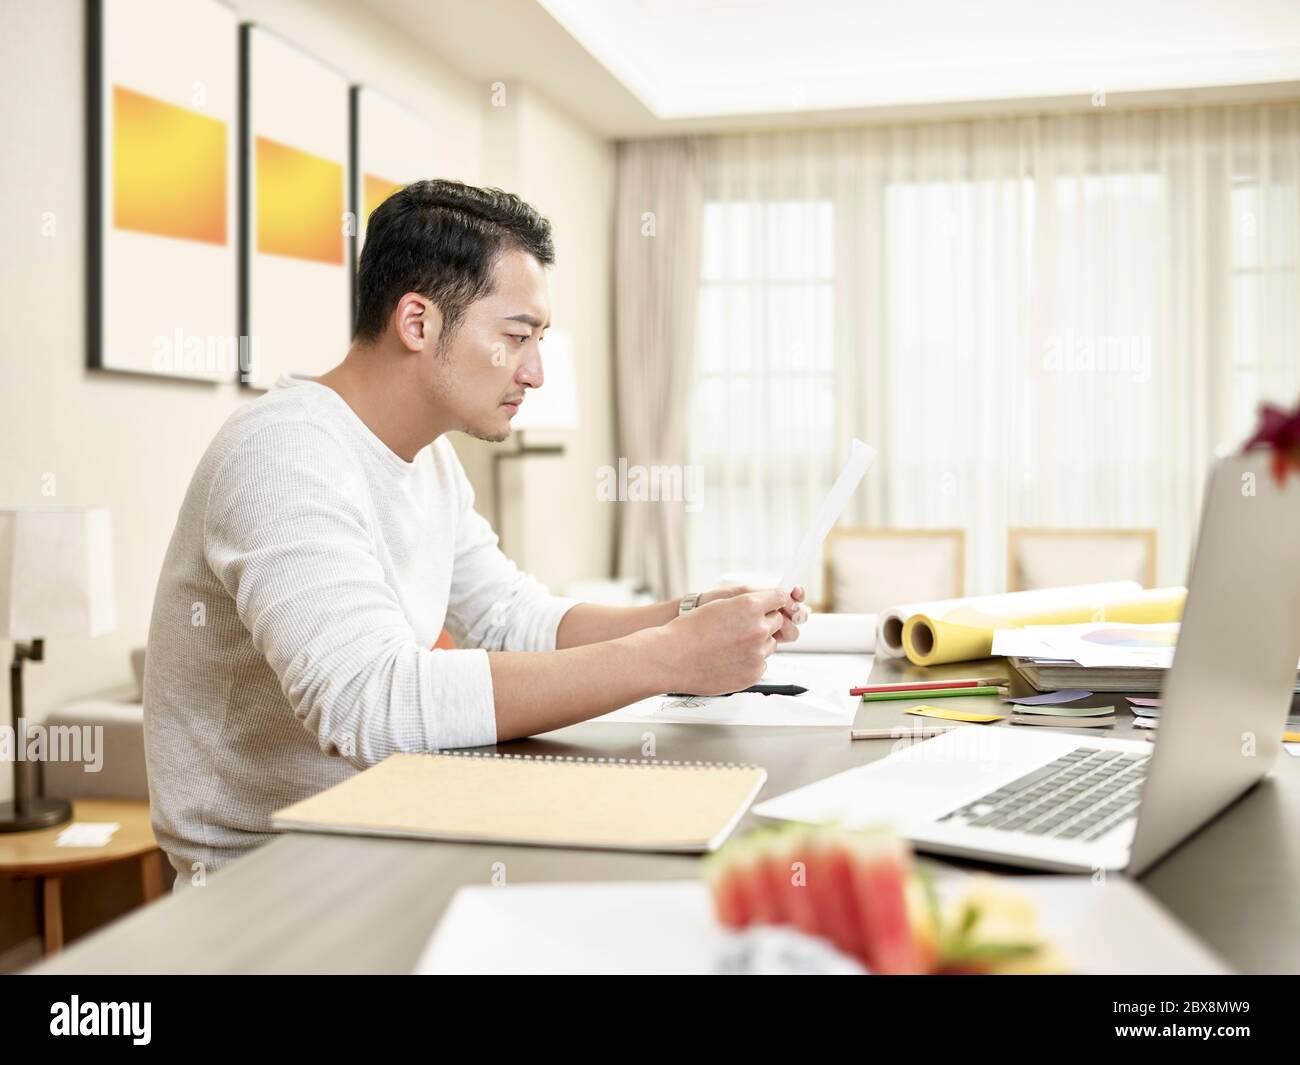 young asian man design professional working from home sitting at kitchen counter reading a document (artwork in background digitally altered) Stock Photo